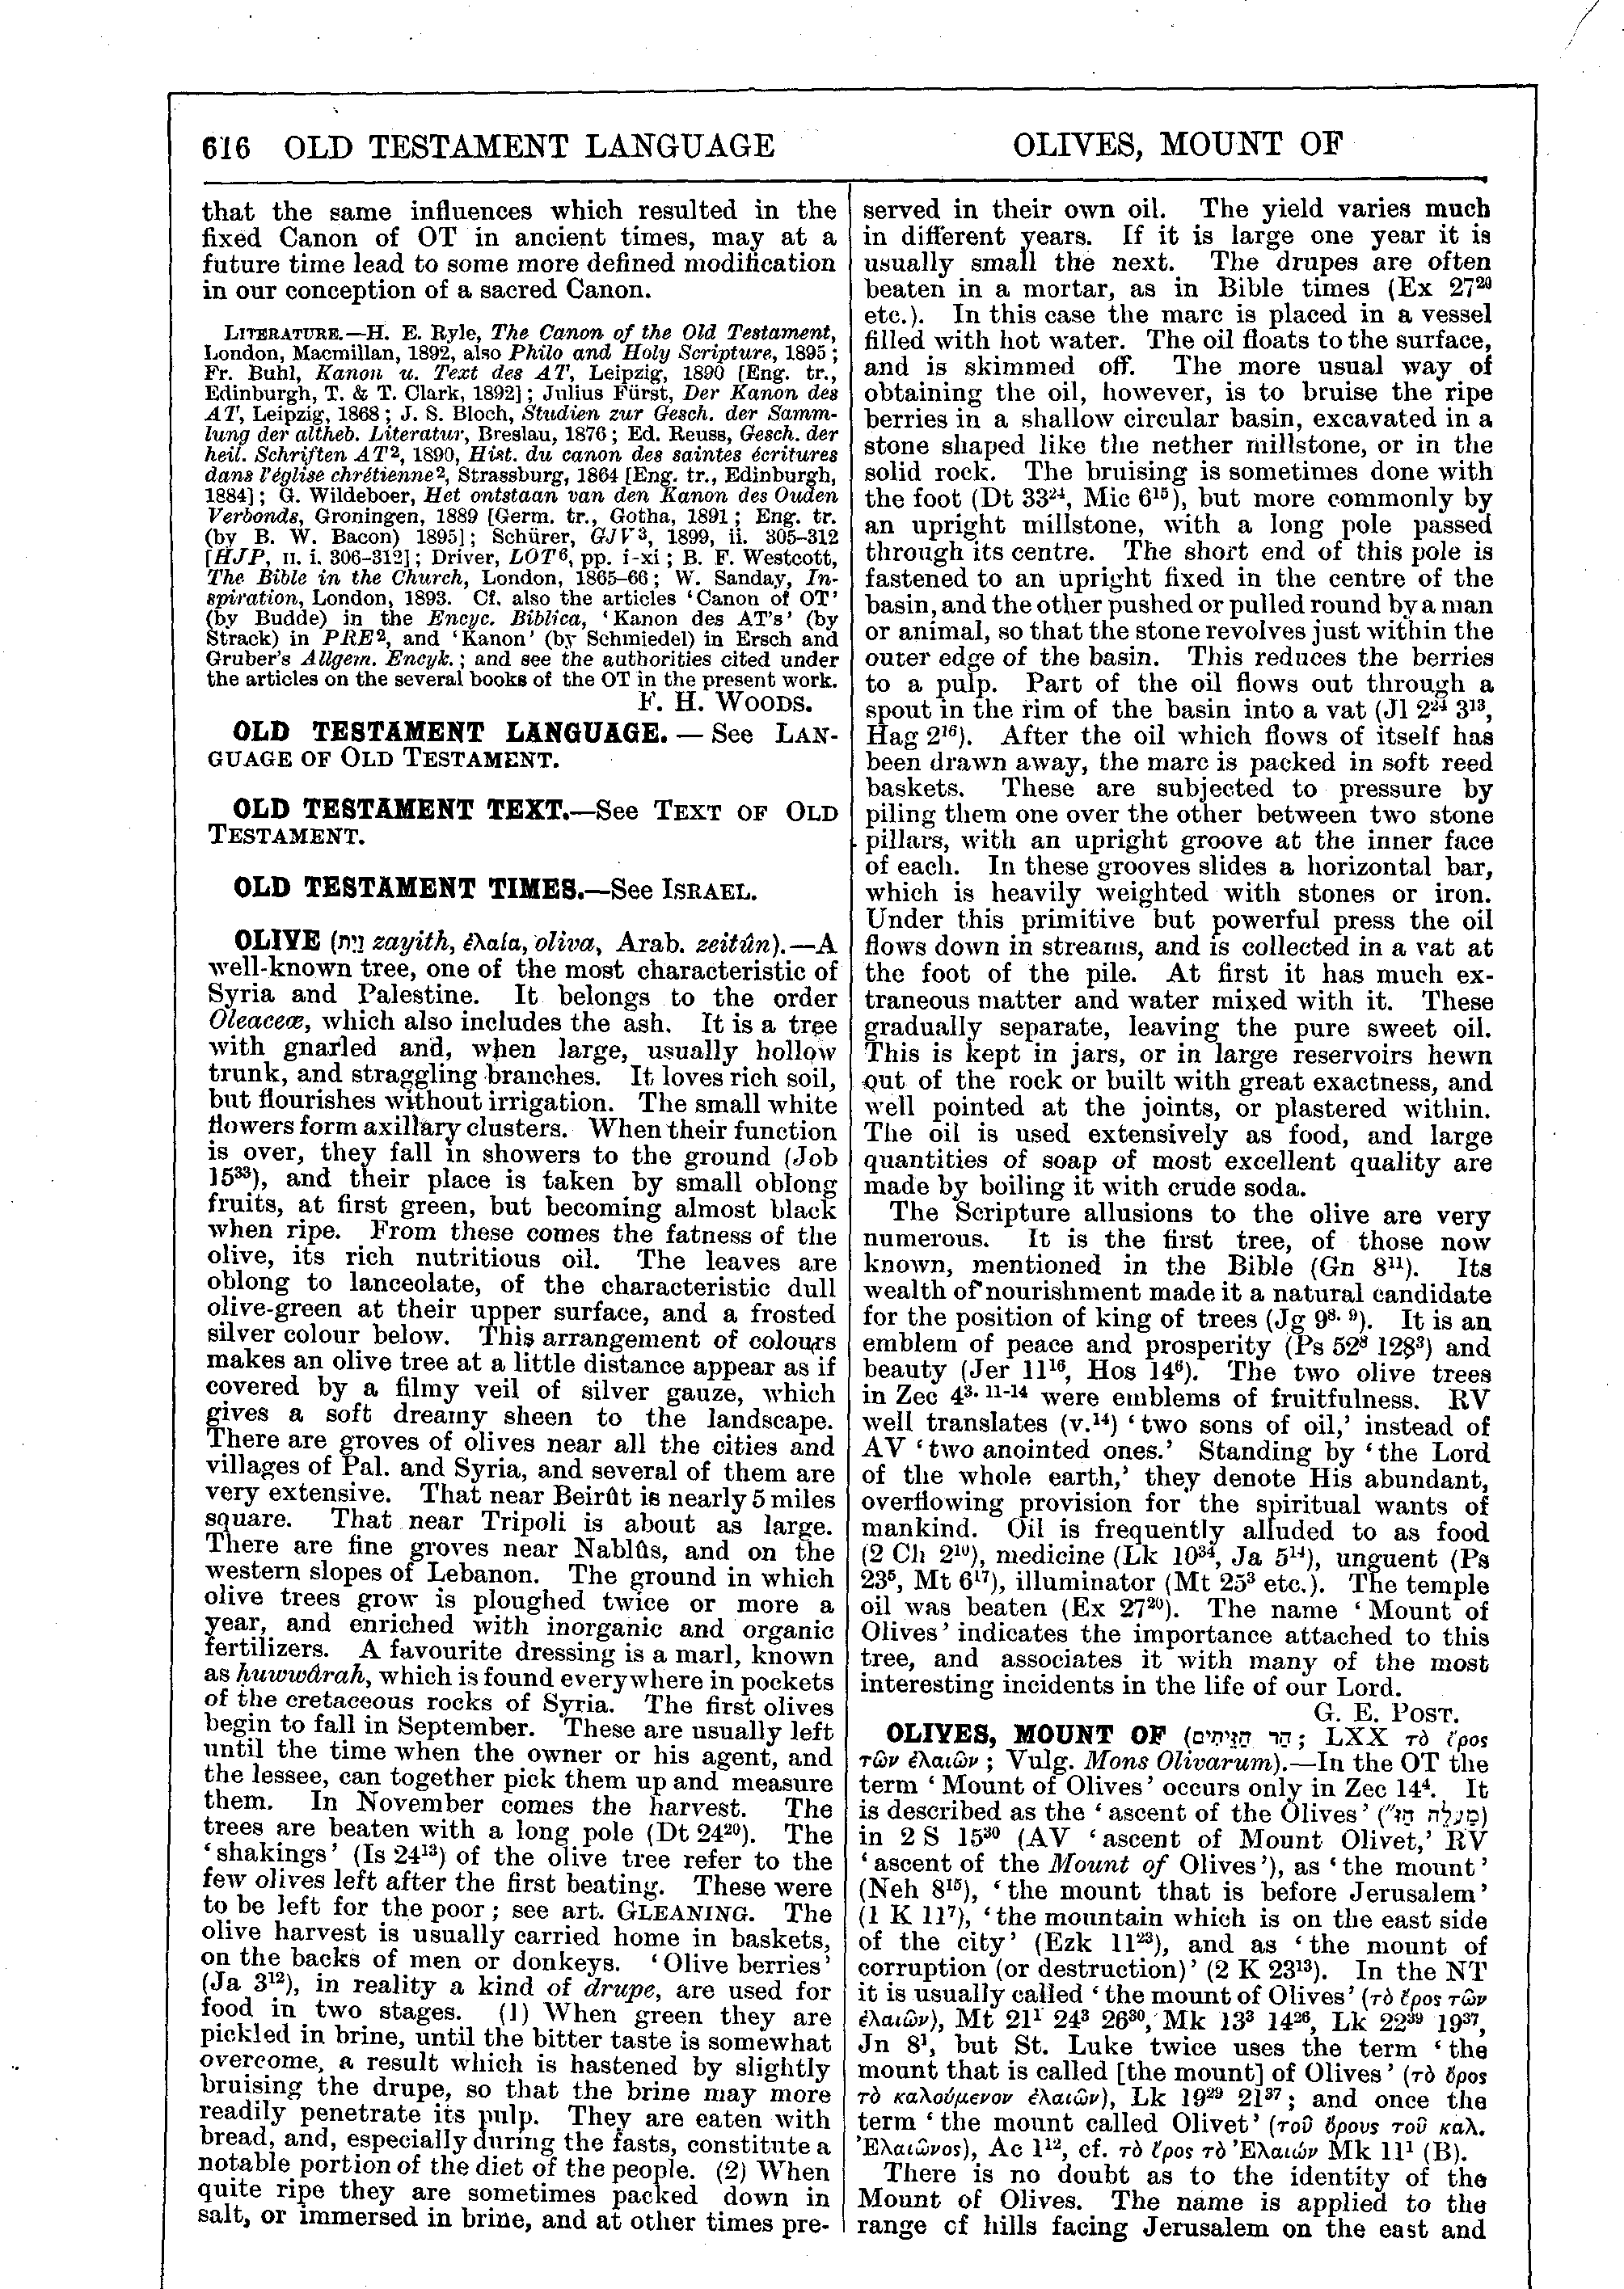 Image of page 616